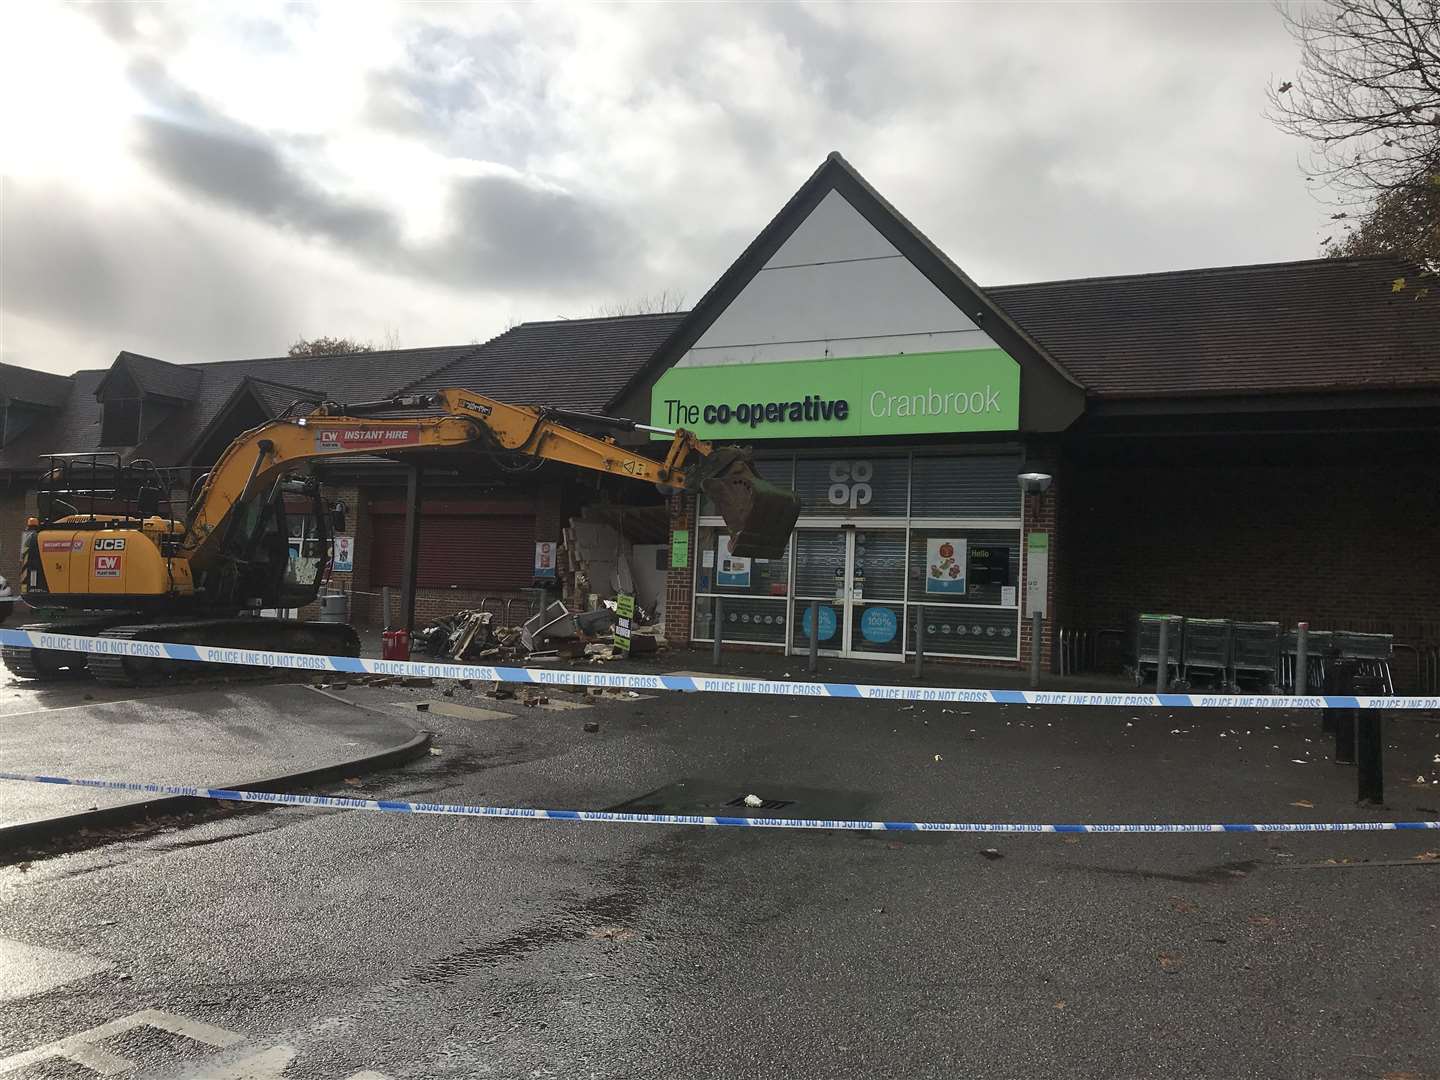 A JCB was used to ram raid the cash machine outside Co-Op off High Street, Cranbrook